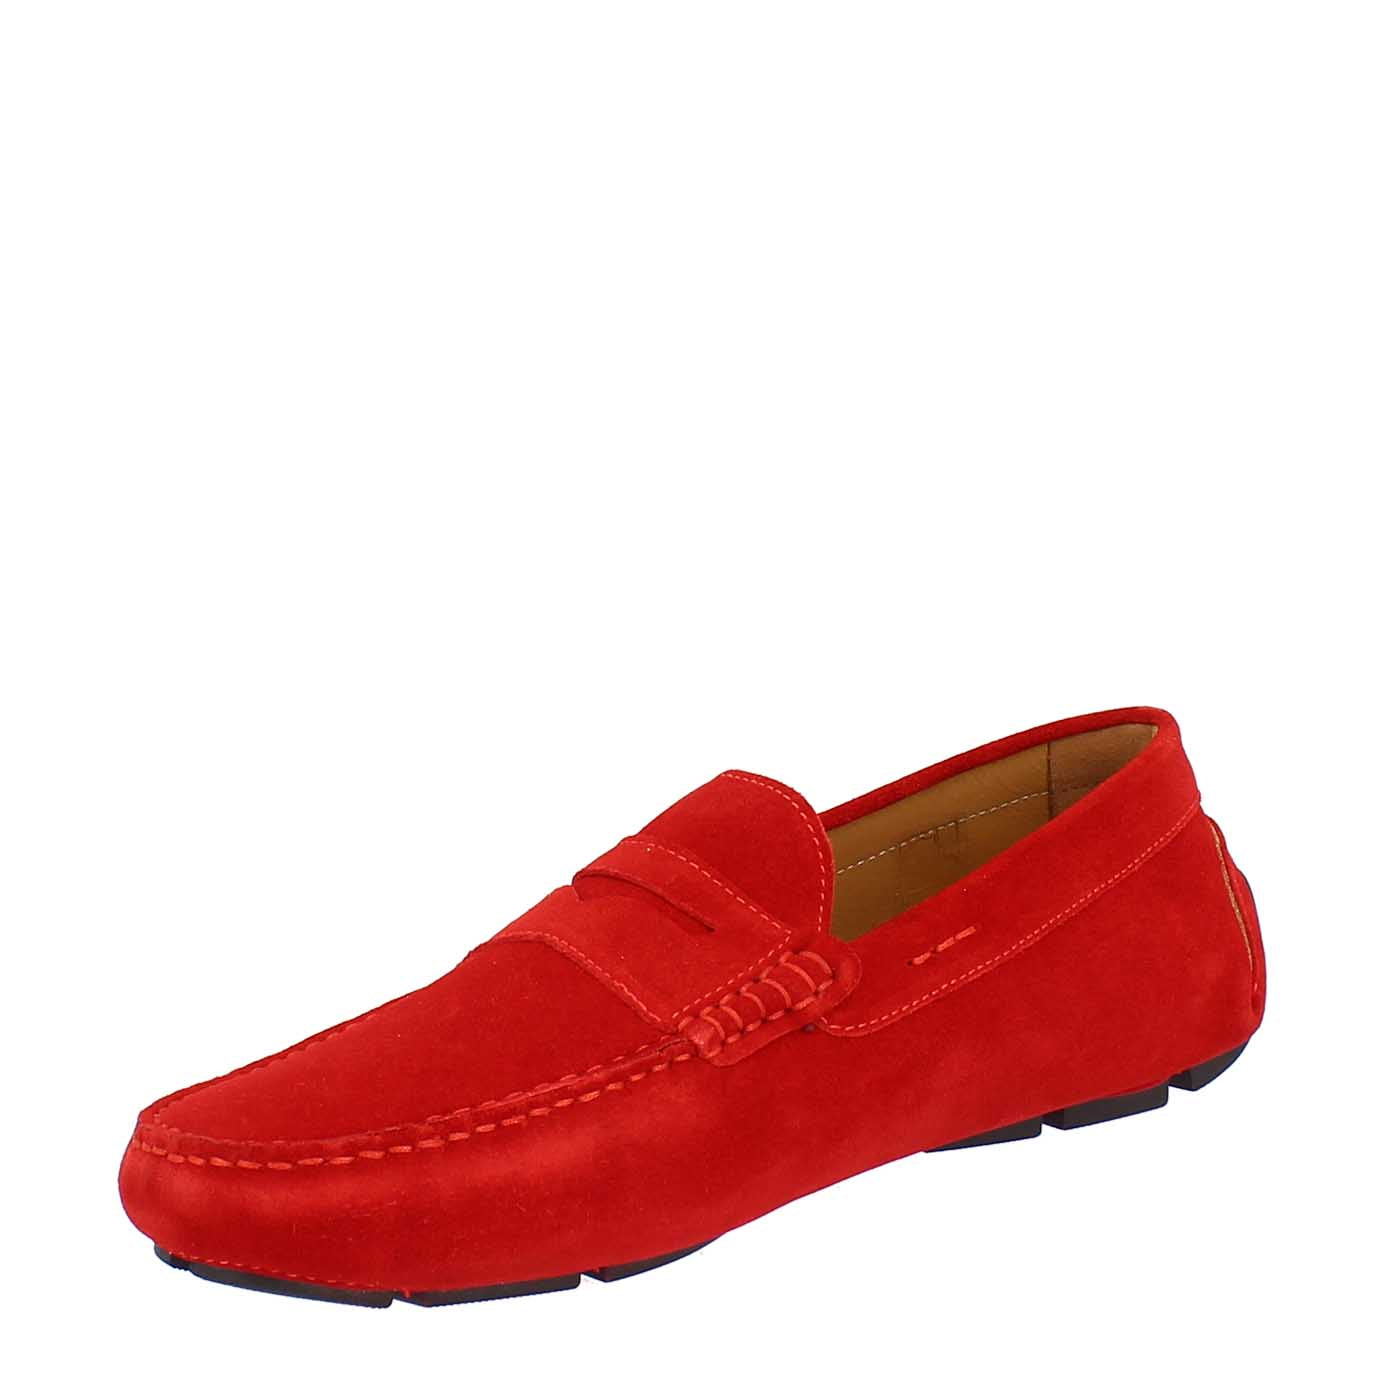 Handmade men's carshoe loafers in LEATHER red suede.